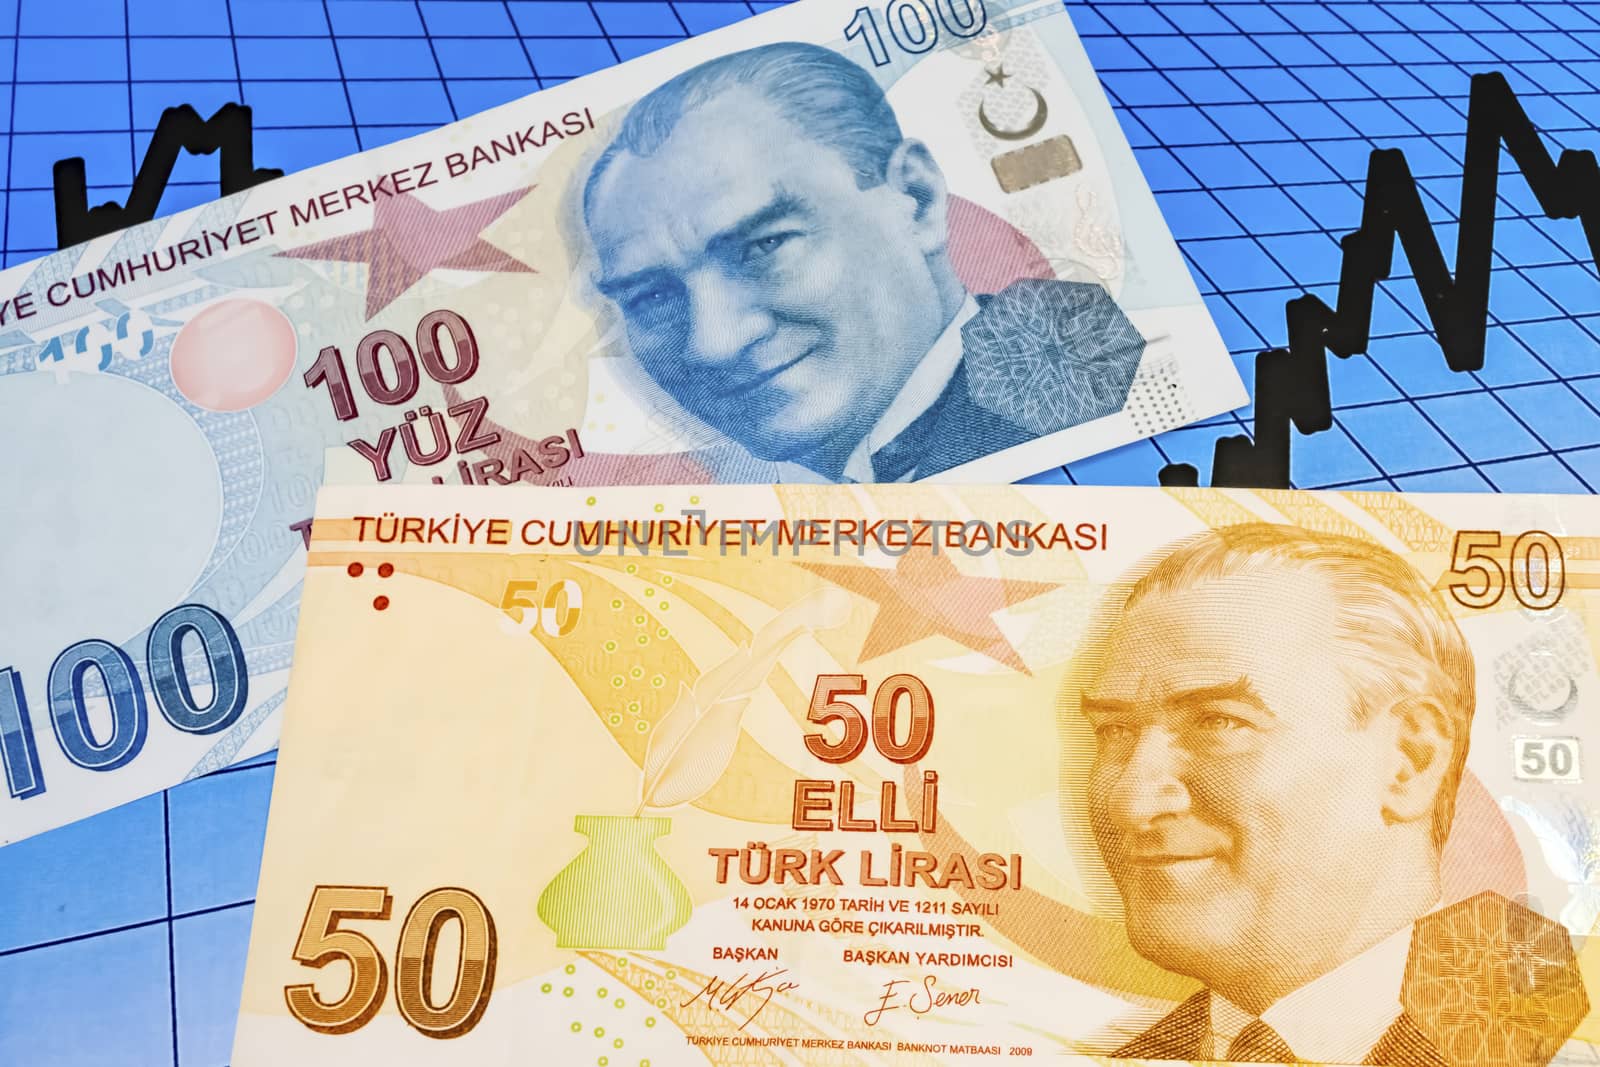 close up turkish lira banknotes with euro bankmotes on background